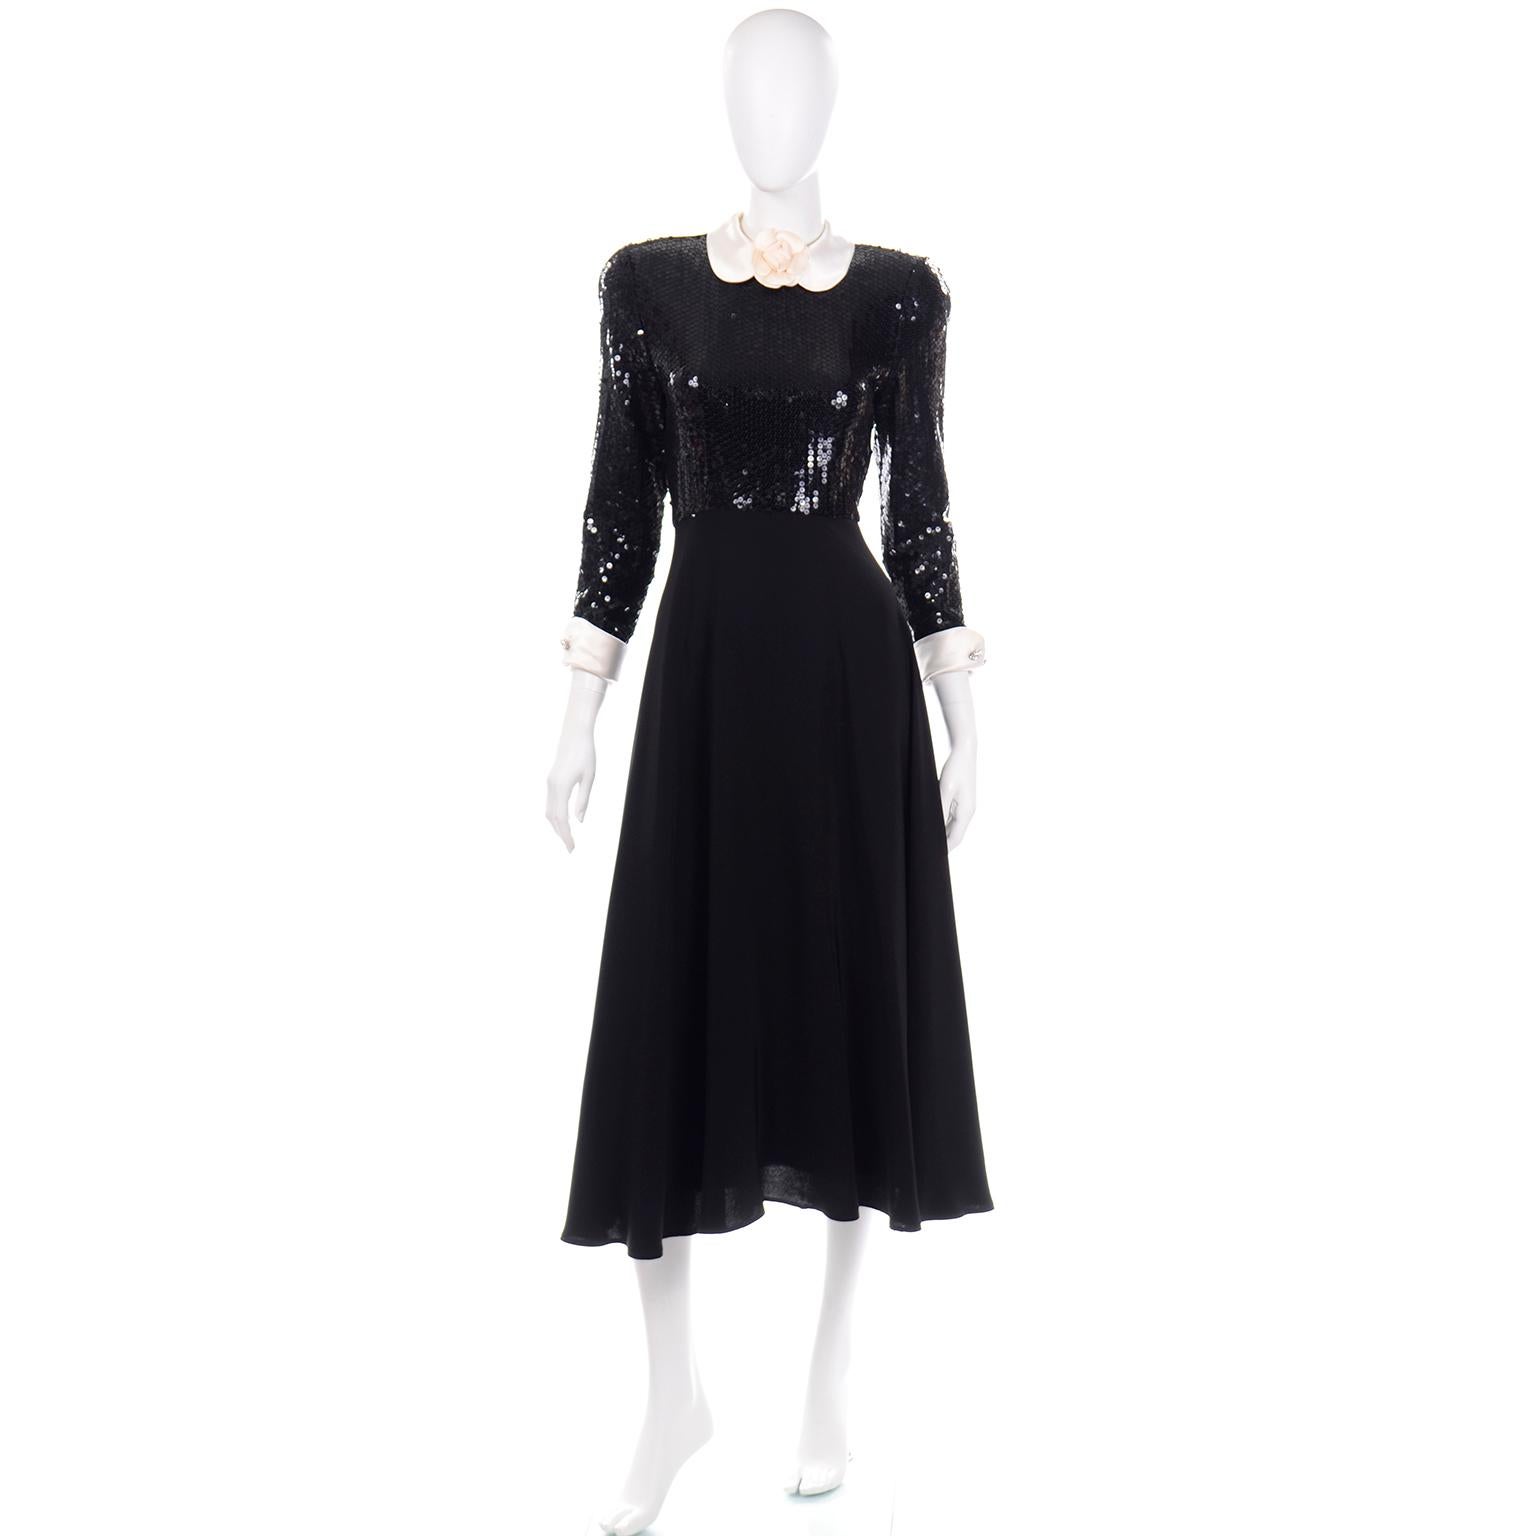 This elegant vintage Albert Nipon black sequin dress would be a great piece to wear to any special evening event! We think that Albert Nipon dresses are so well made and we tend to grab them whenever we see them! The bodice of the dress is covered